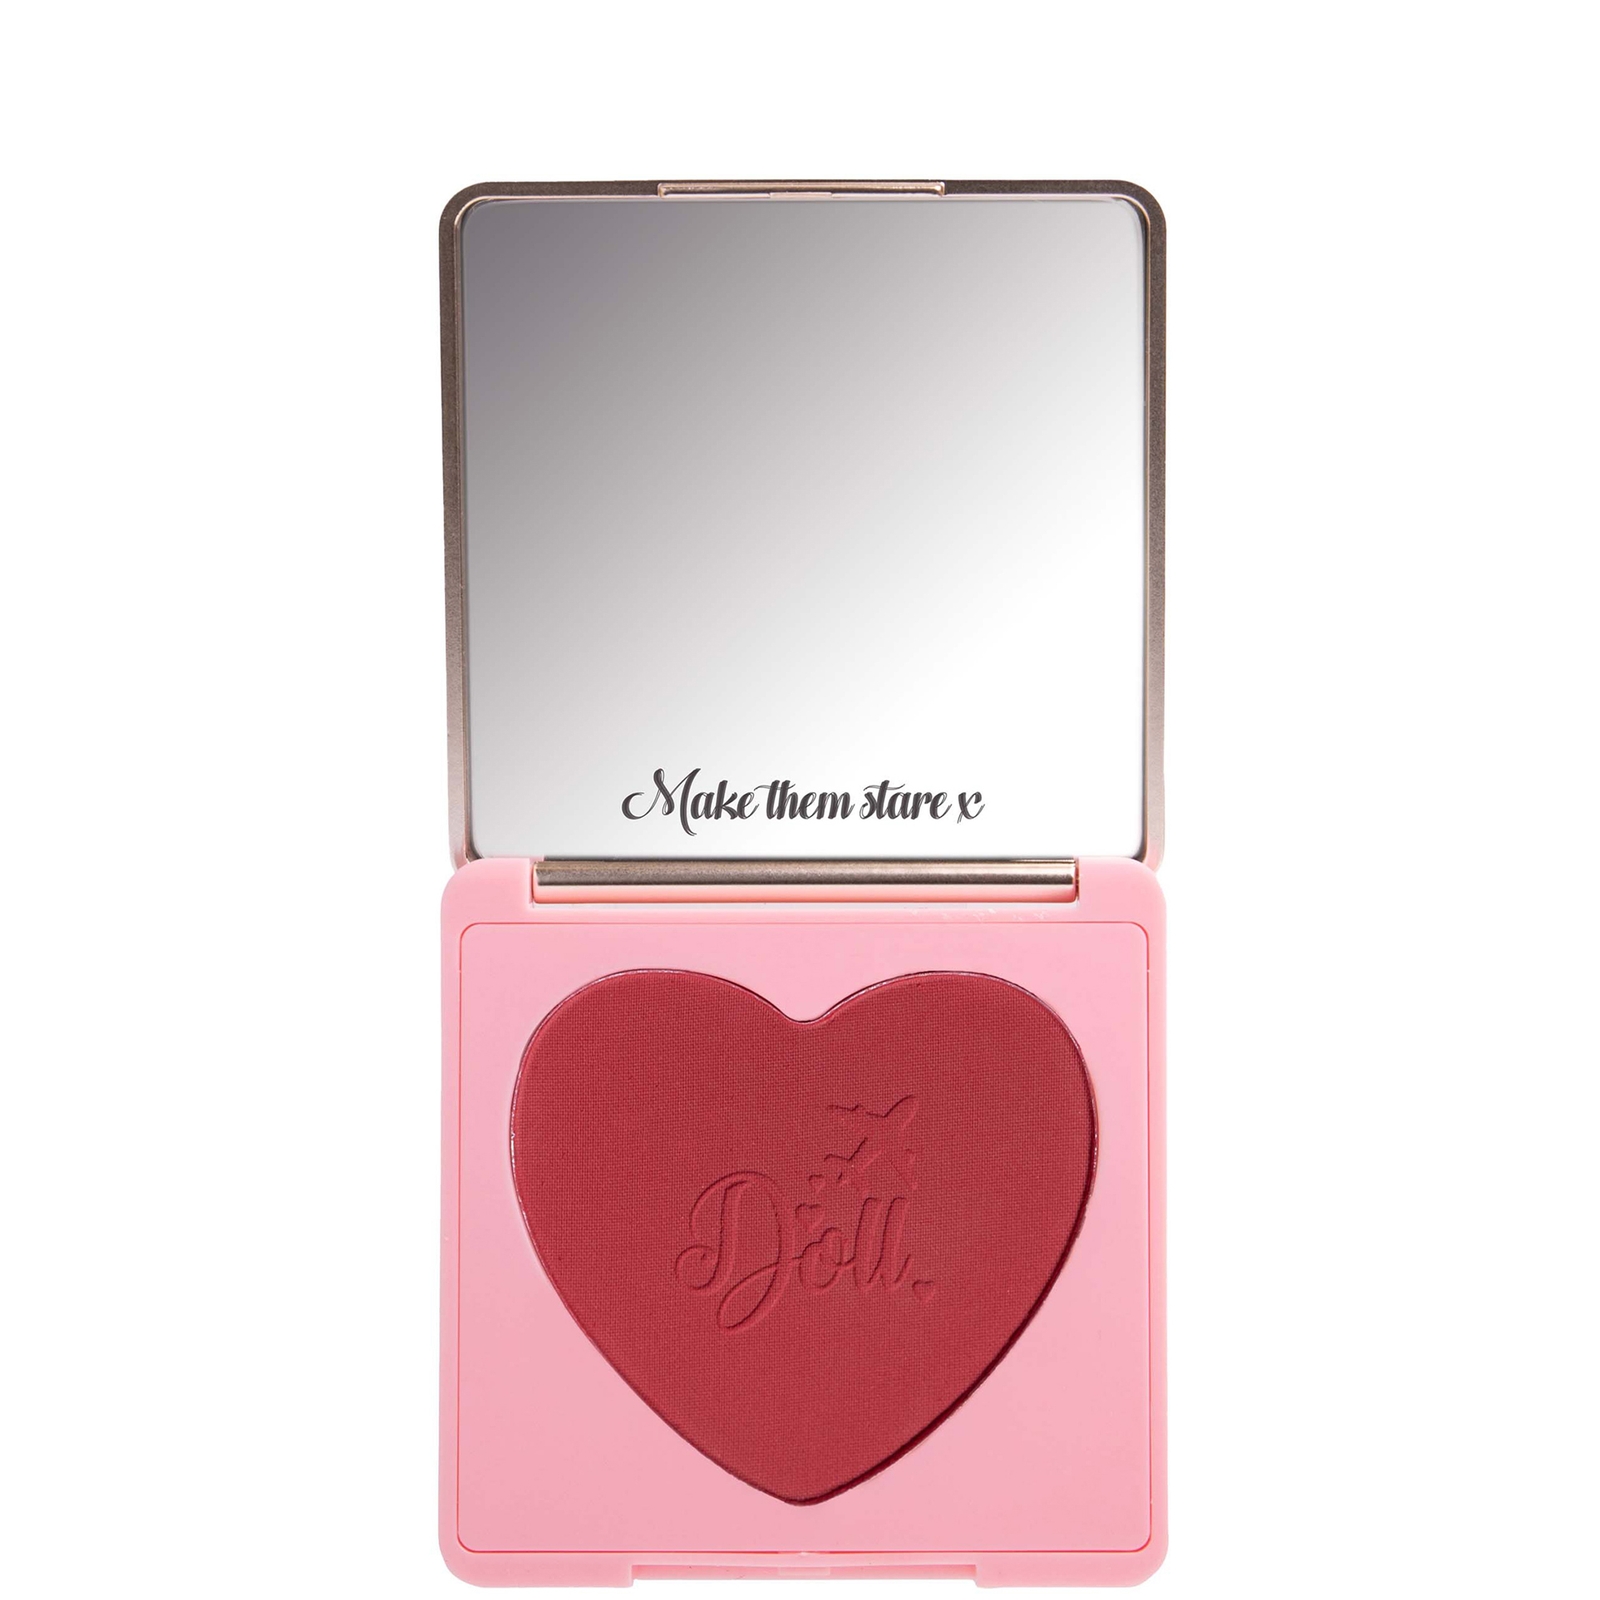 Doll Beauty Blusher 6g (Various Shades) - Aper Doll Spritz